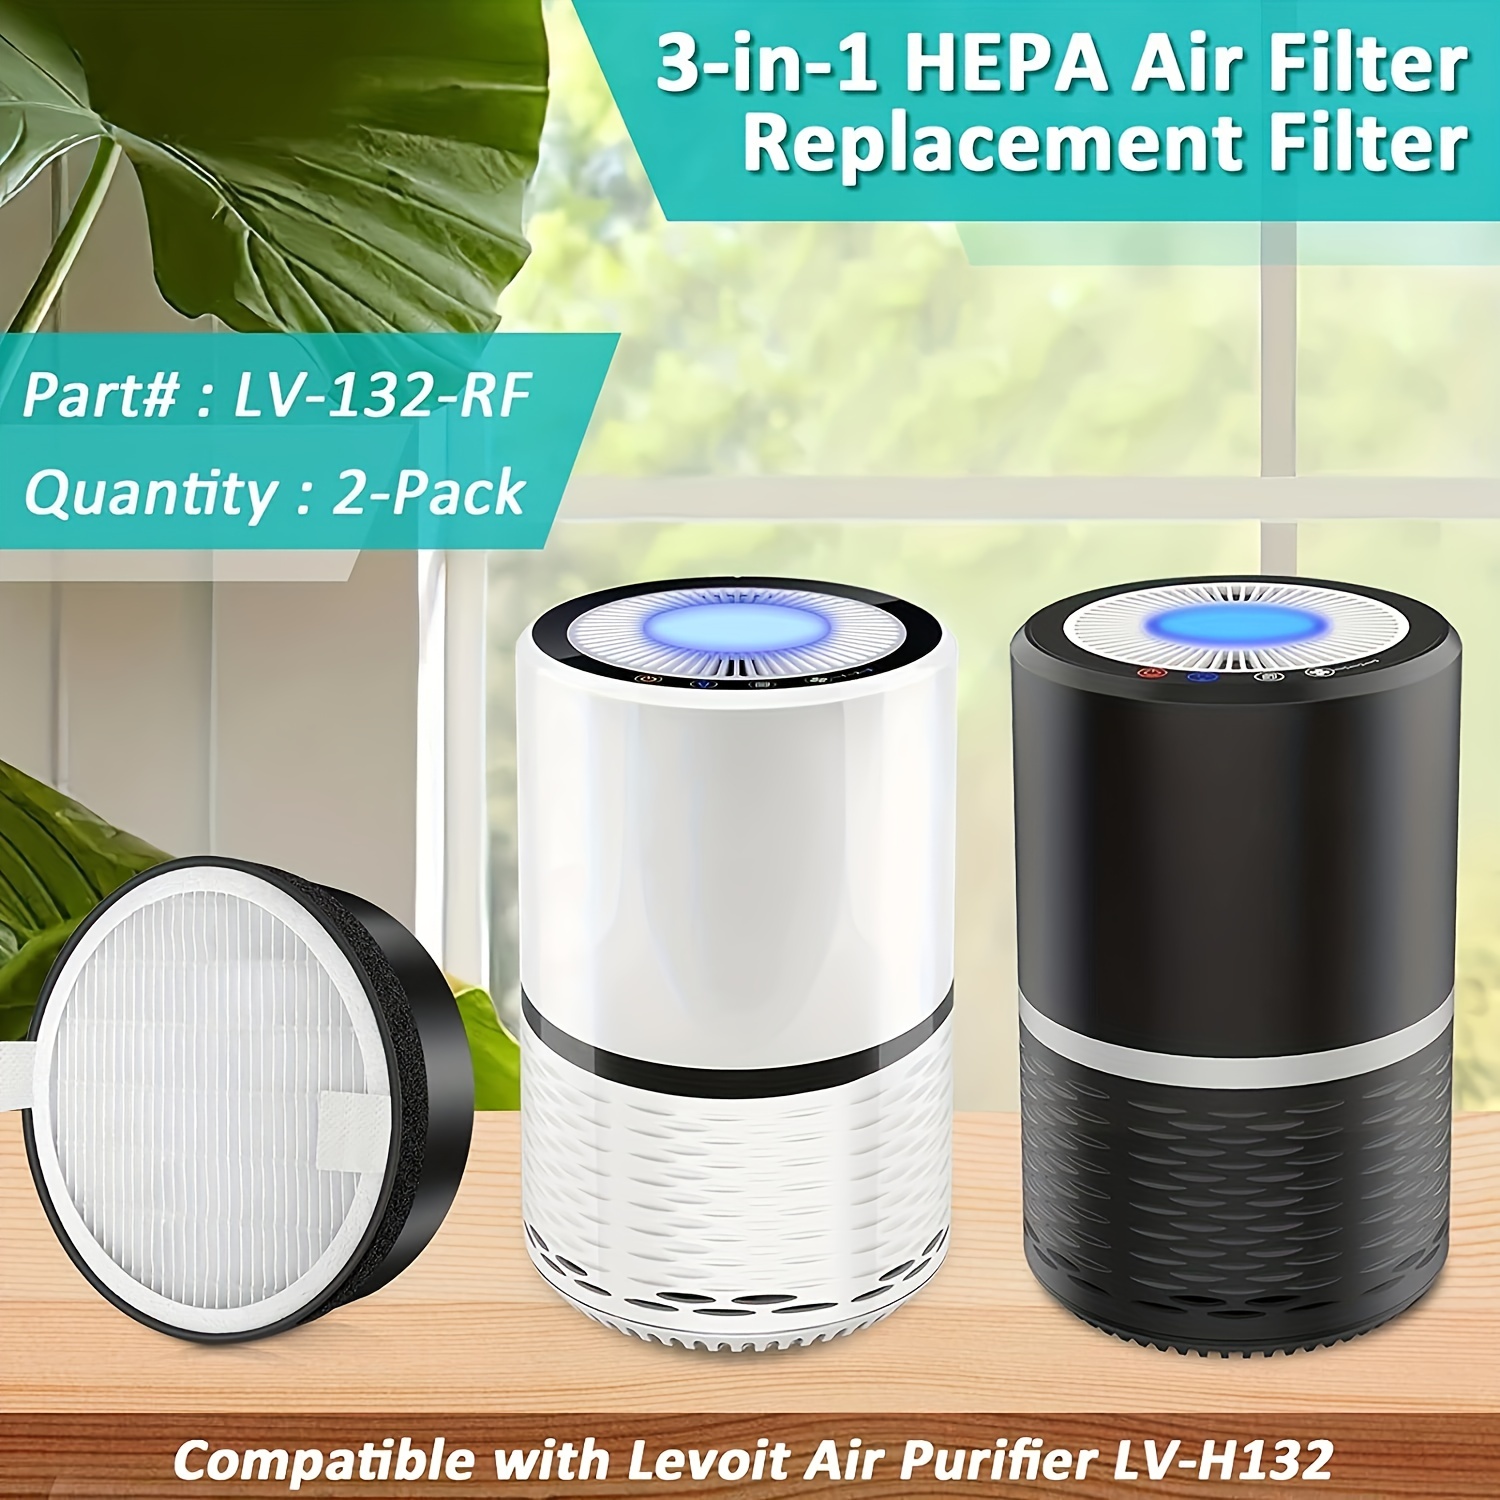 Levoit LV-H132 Air Purifier with True HEPA Filter